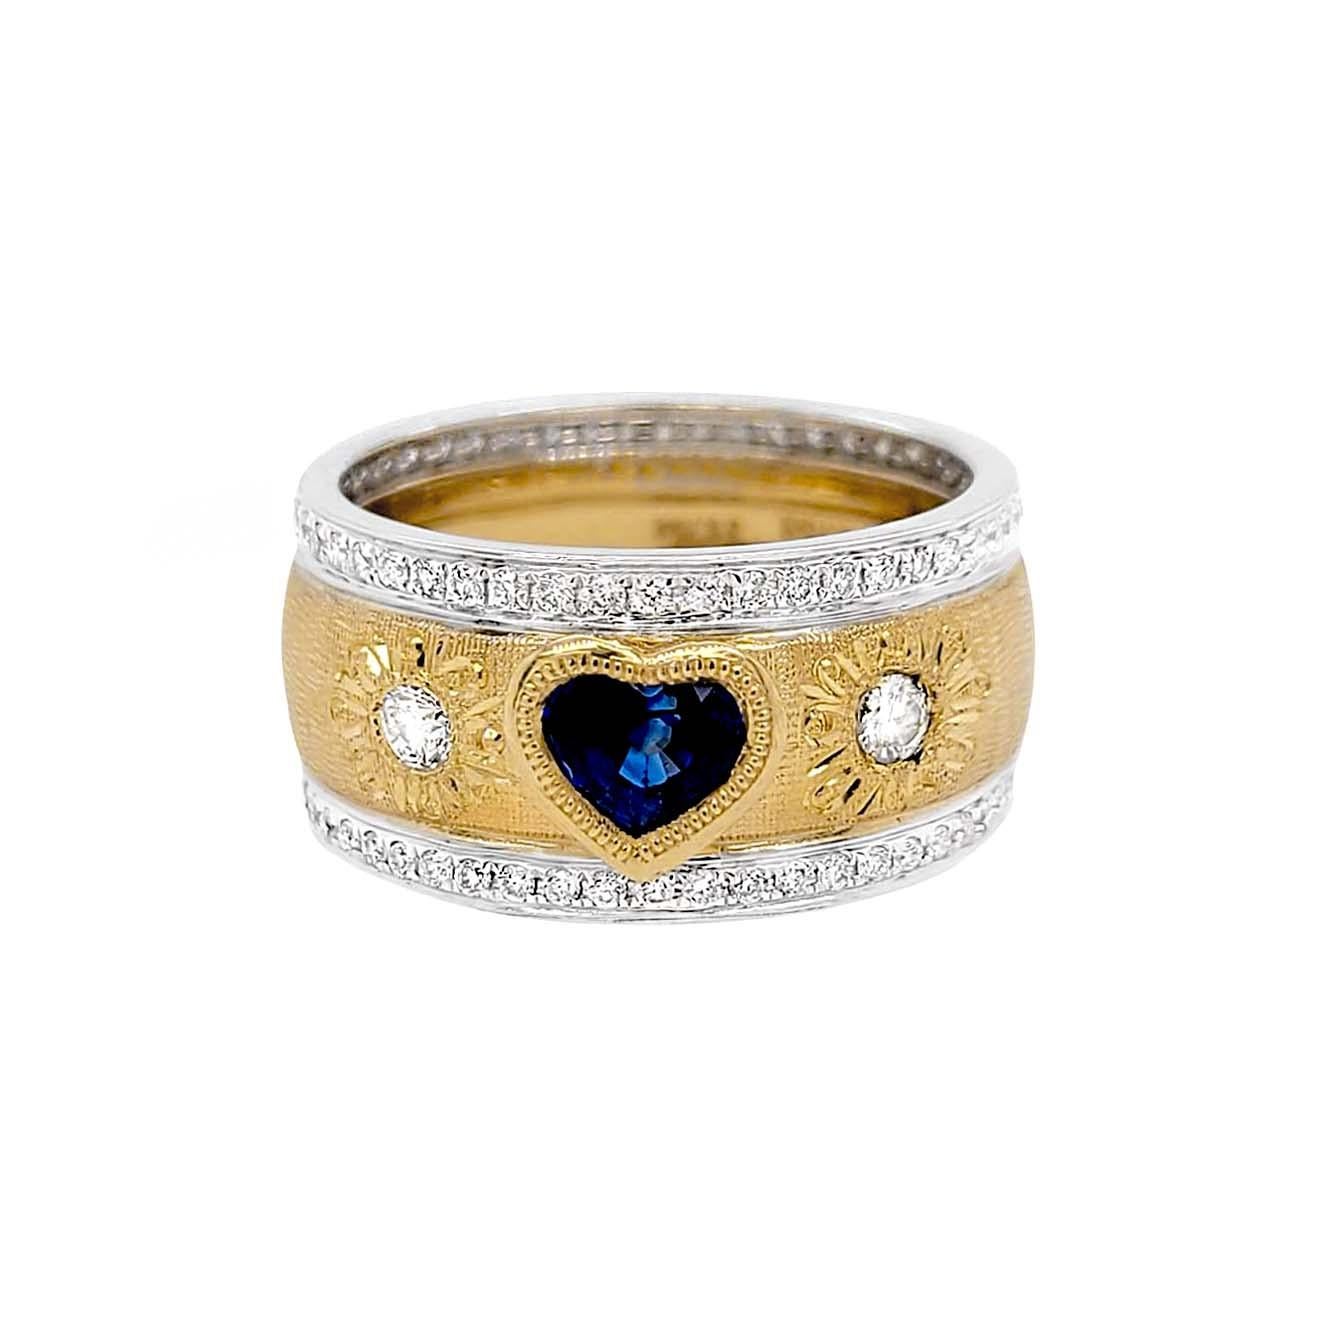 Produced by award winning Italian designer Stefano Vitolo. Stefano creates custom artisanal one of a kind jewelry with excellent gemstones in a truly old world Italian craftmanship.
This handcrafted ring has 0.81 total carat weight of F/G color and